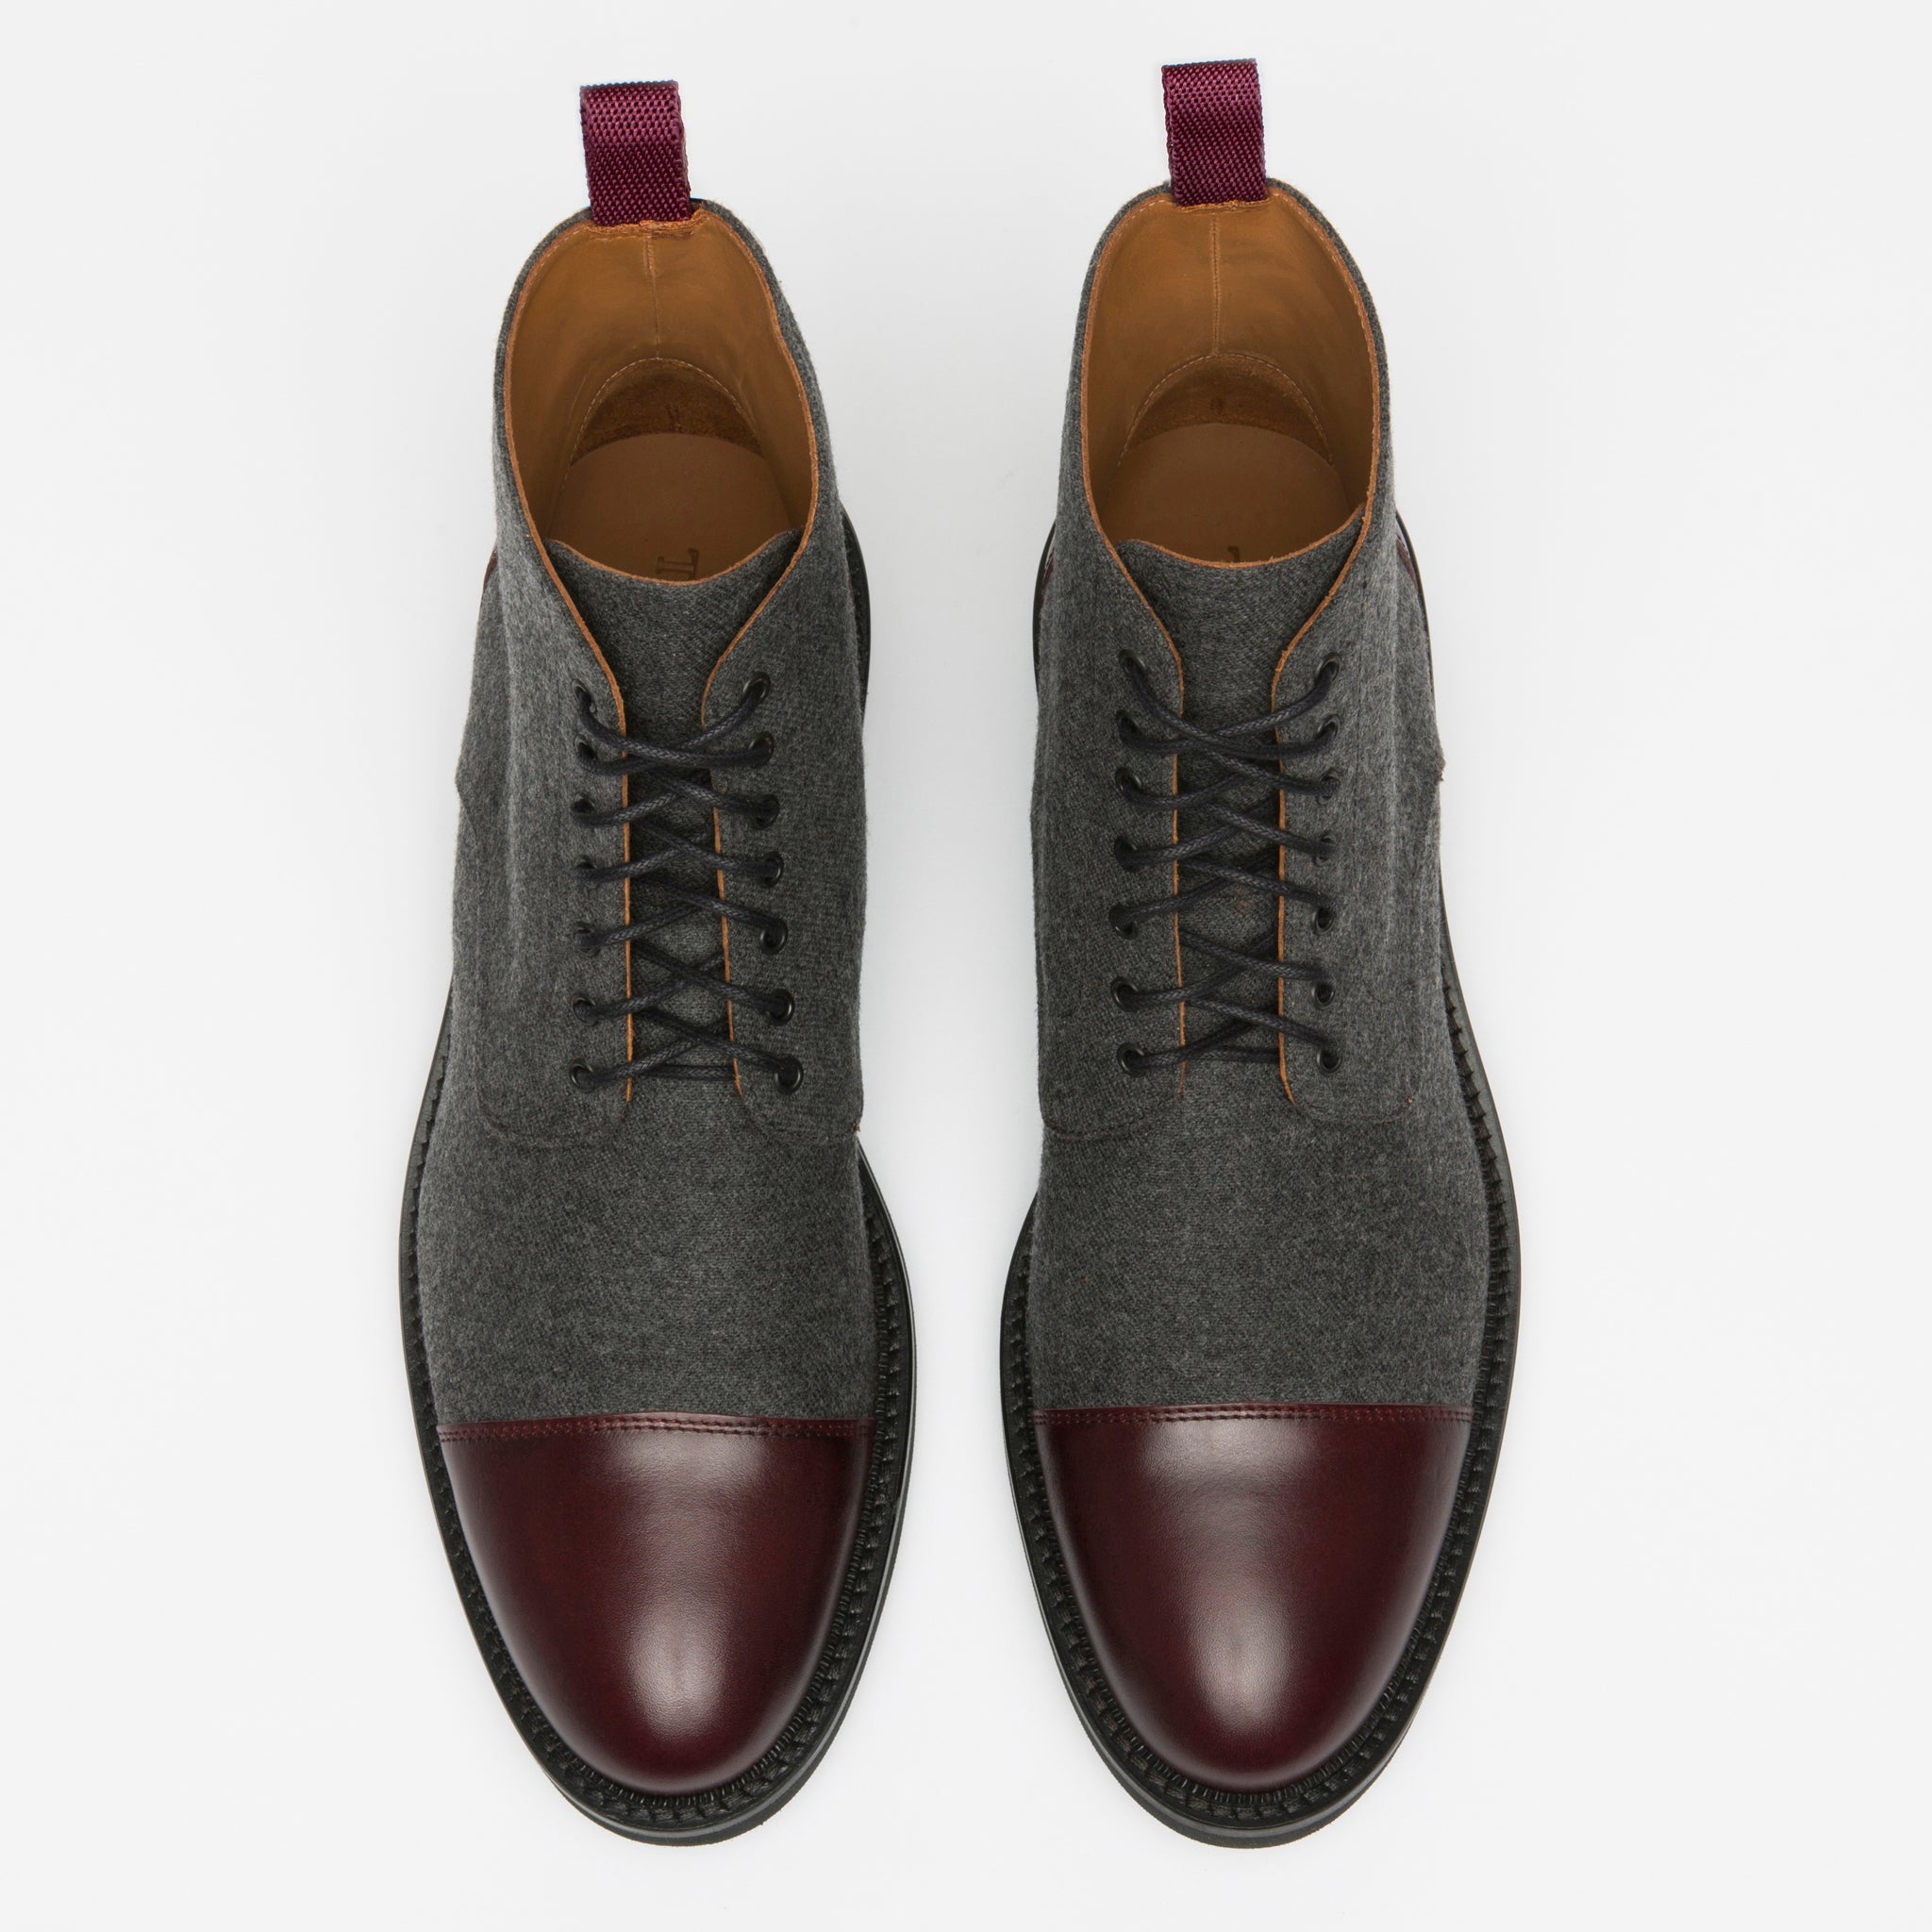 The Jack Boot in Grey Oxblood over head view